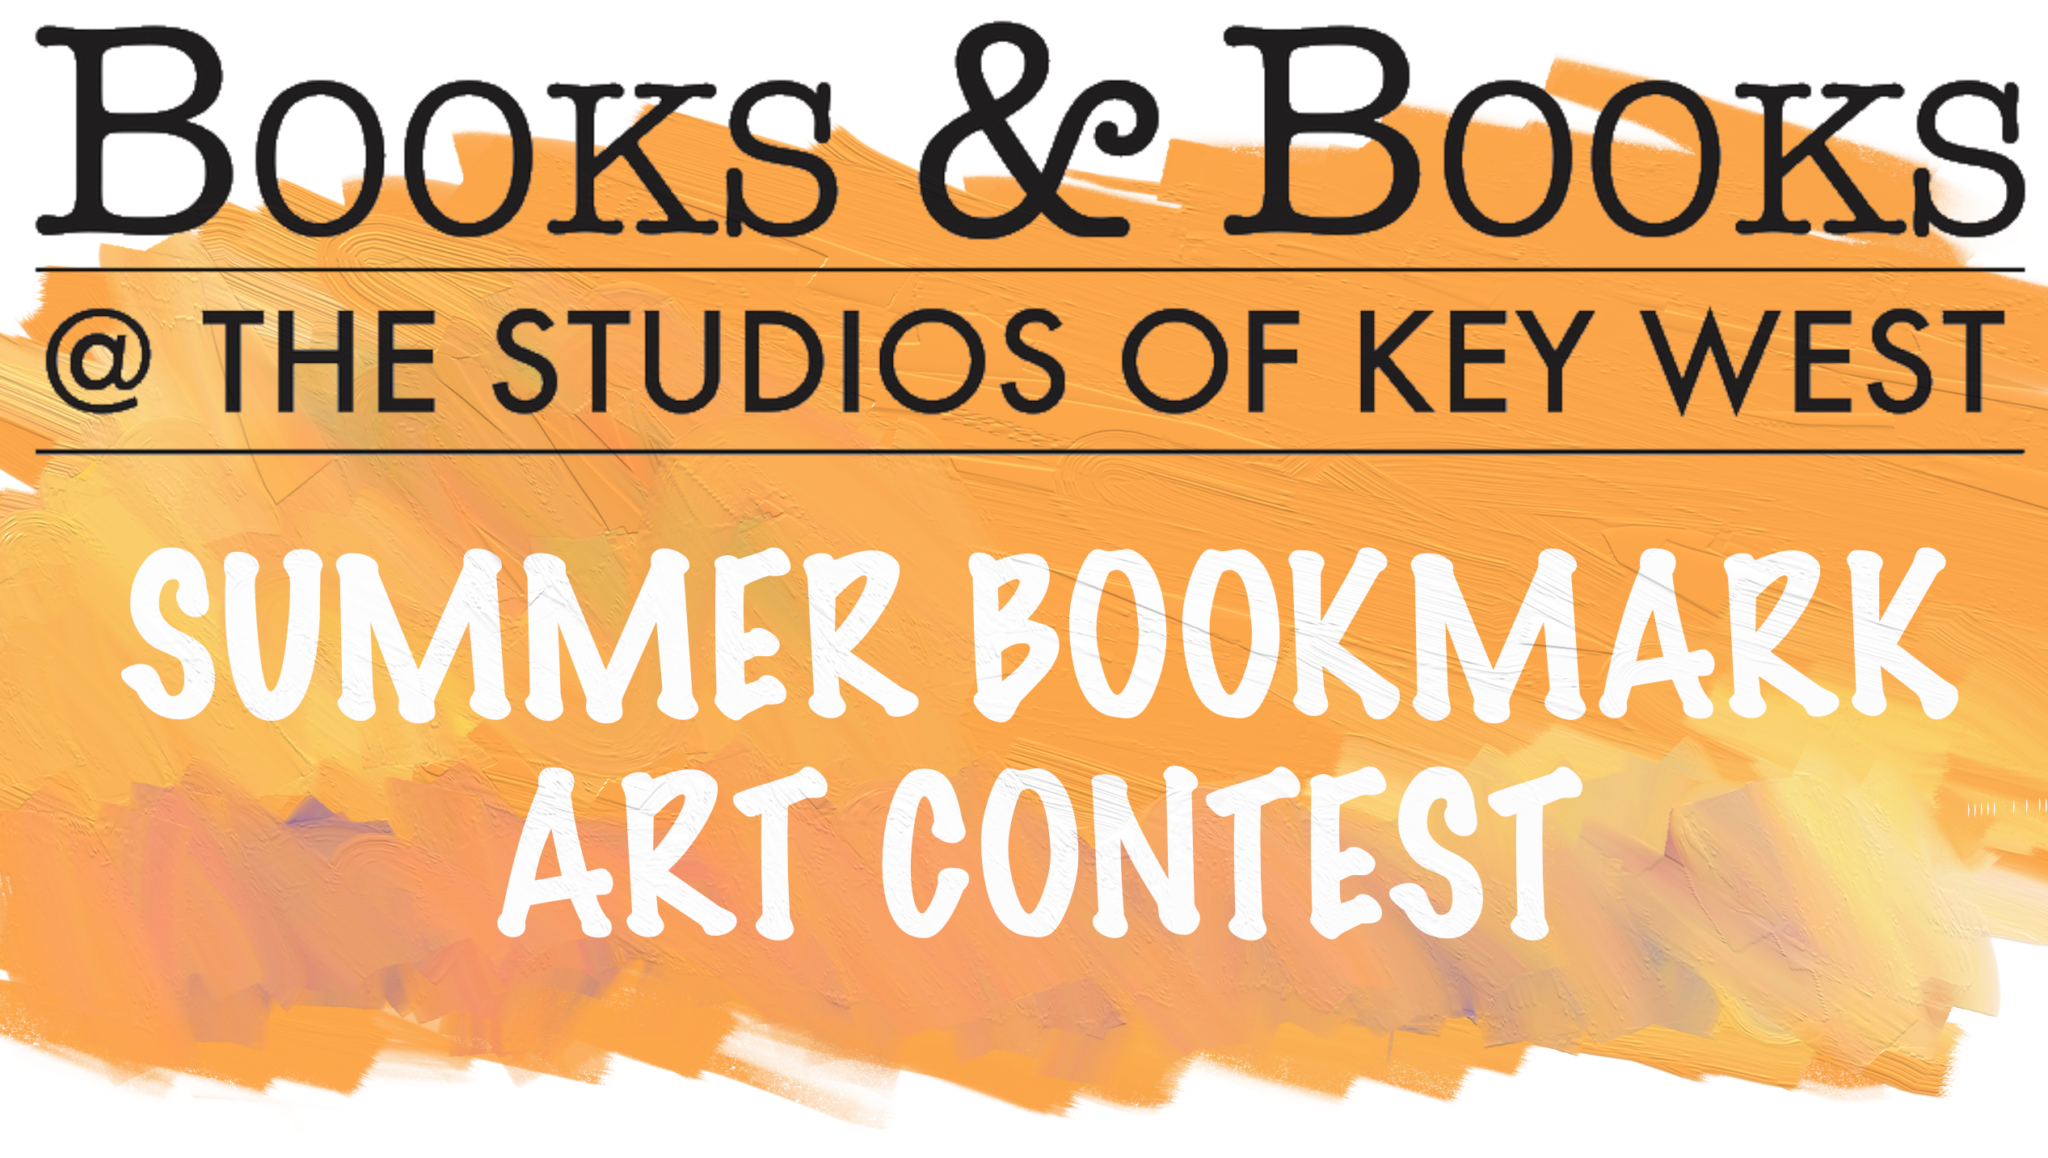 Now in its seventh year, the Books & Books summer art contest brings together creative bookmark designs by local artists. The contest calls for works in any style —paint, collage, pencil—on 4 x 12” canvases.